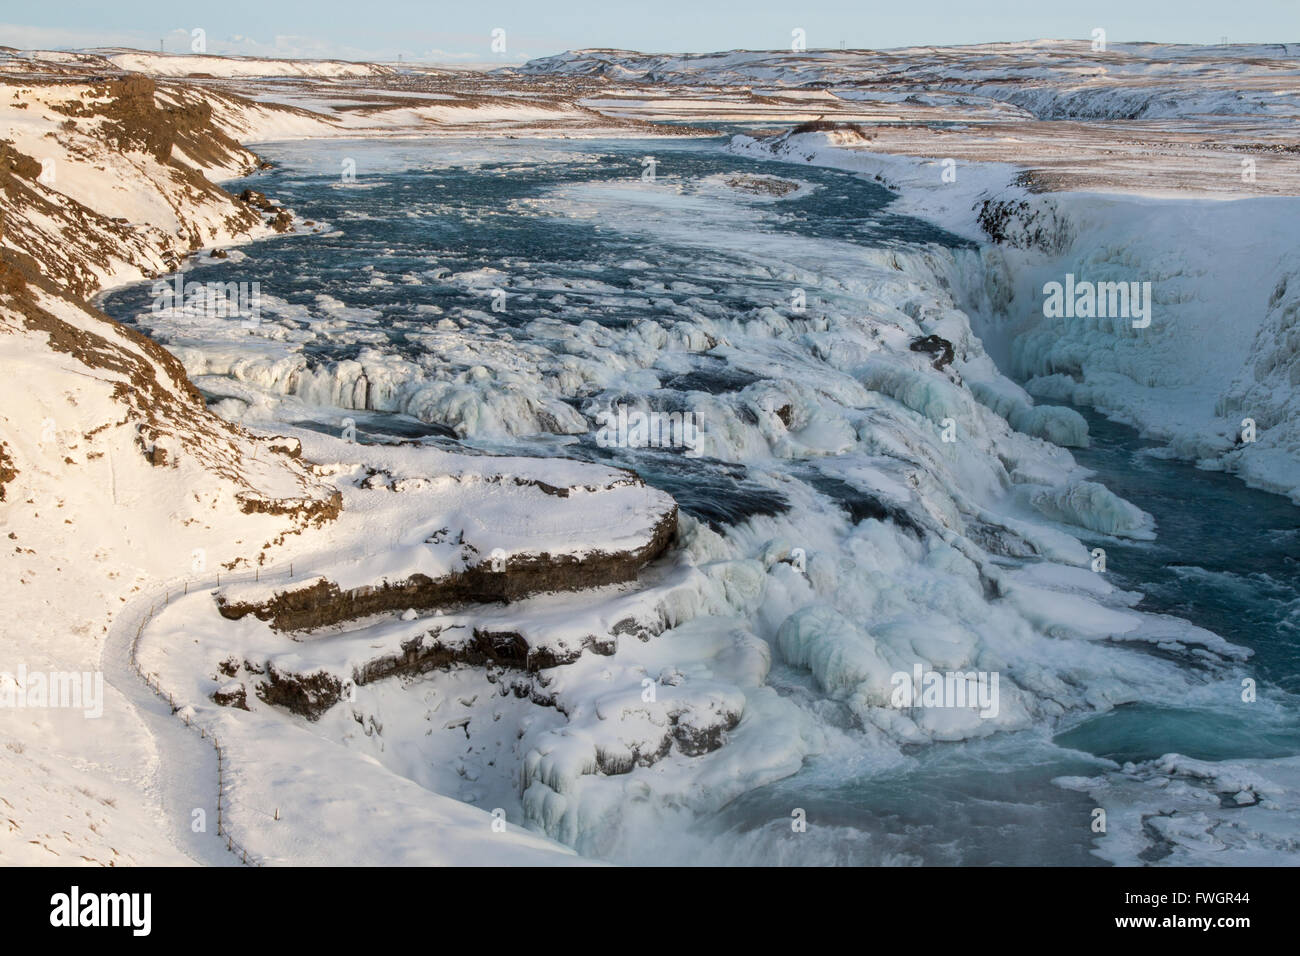 Gulfoss waterfalls, view looking up Hvita river from viewpoint in winter Stock Photo